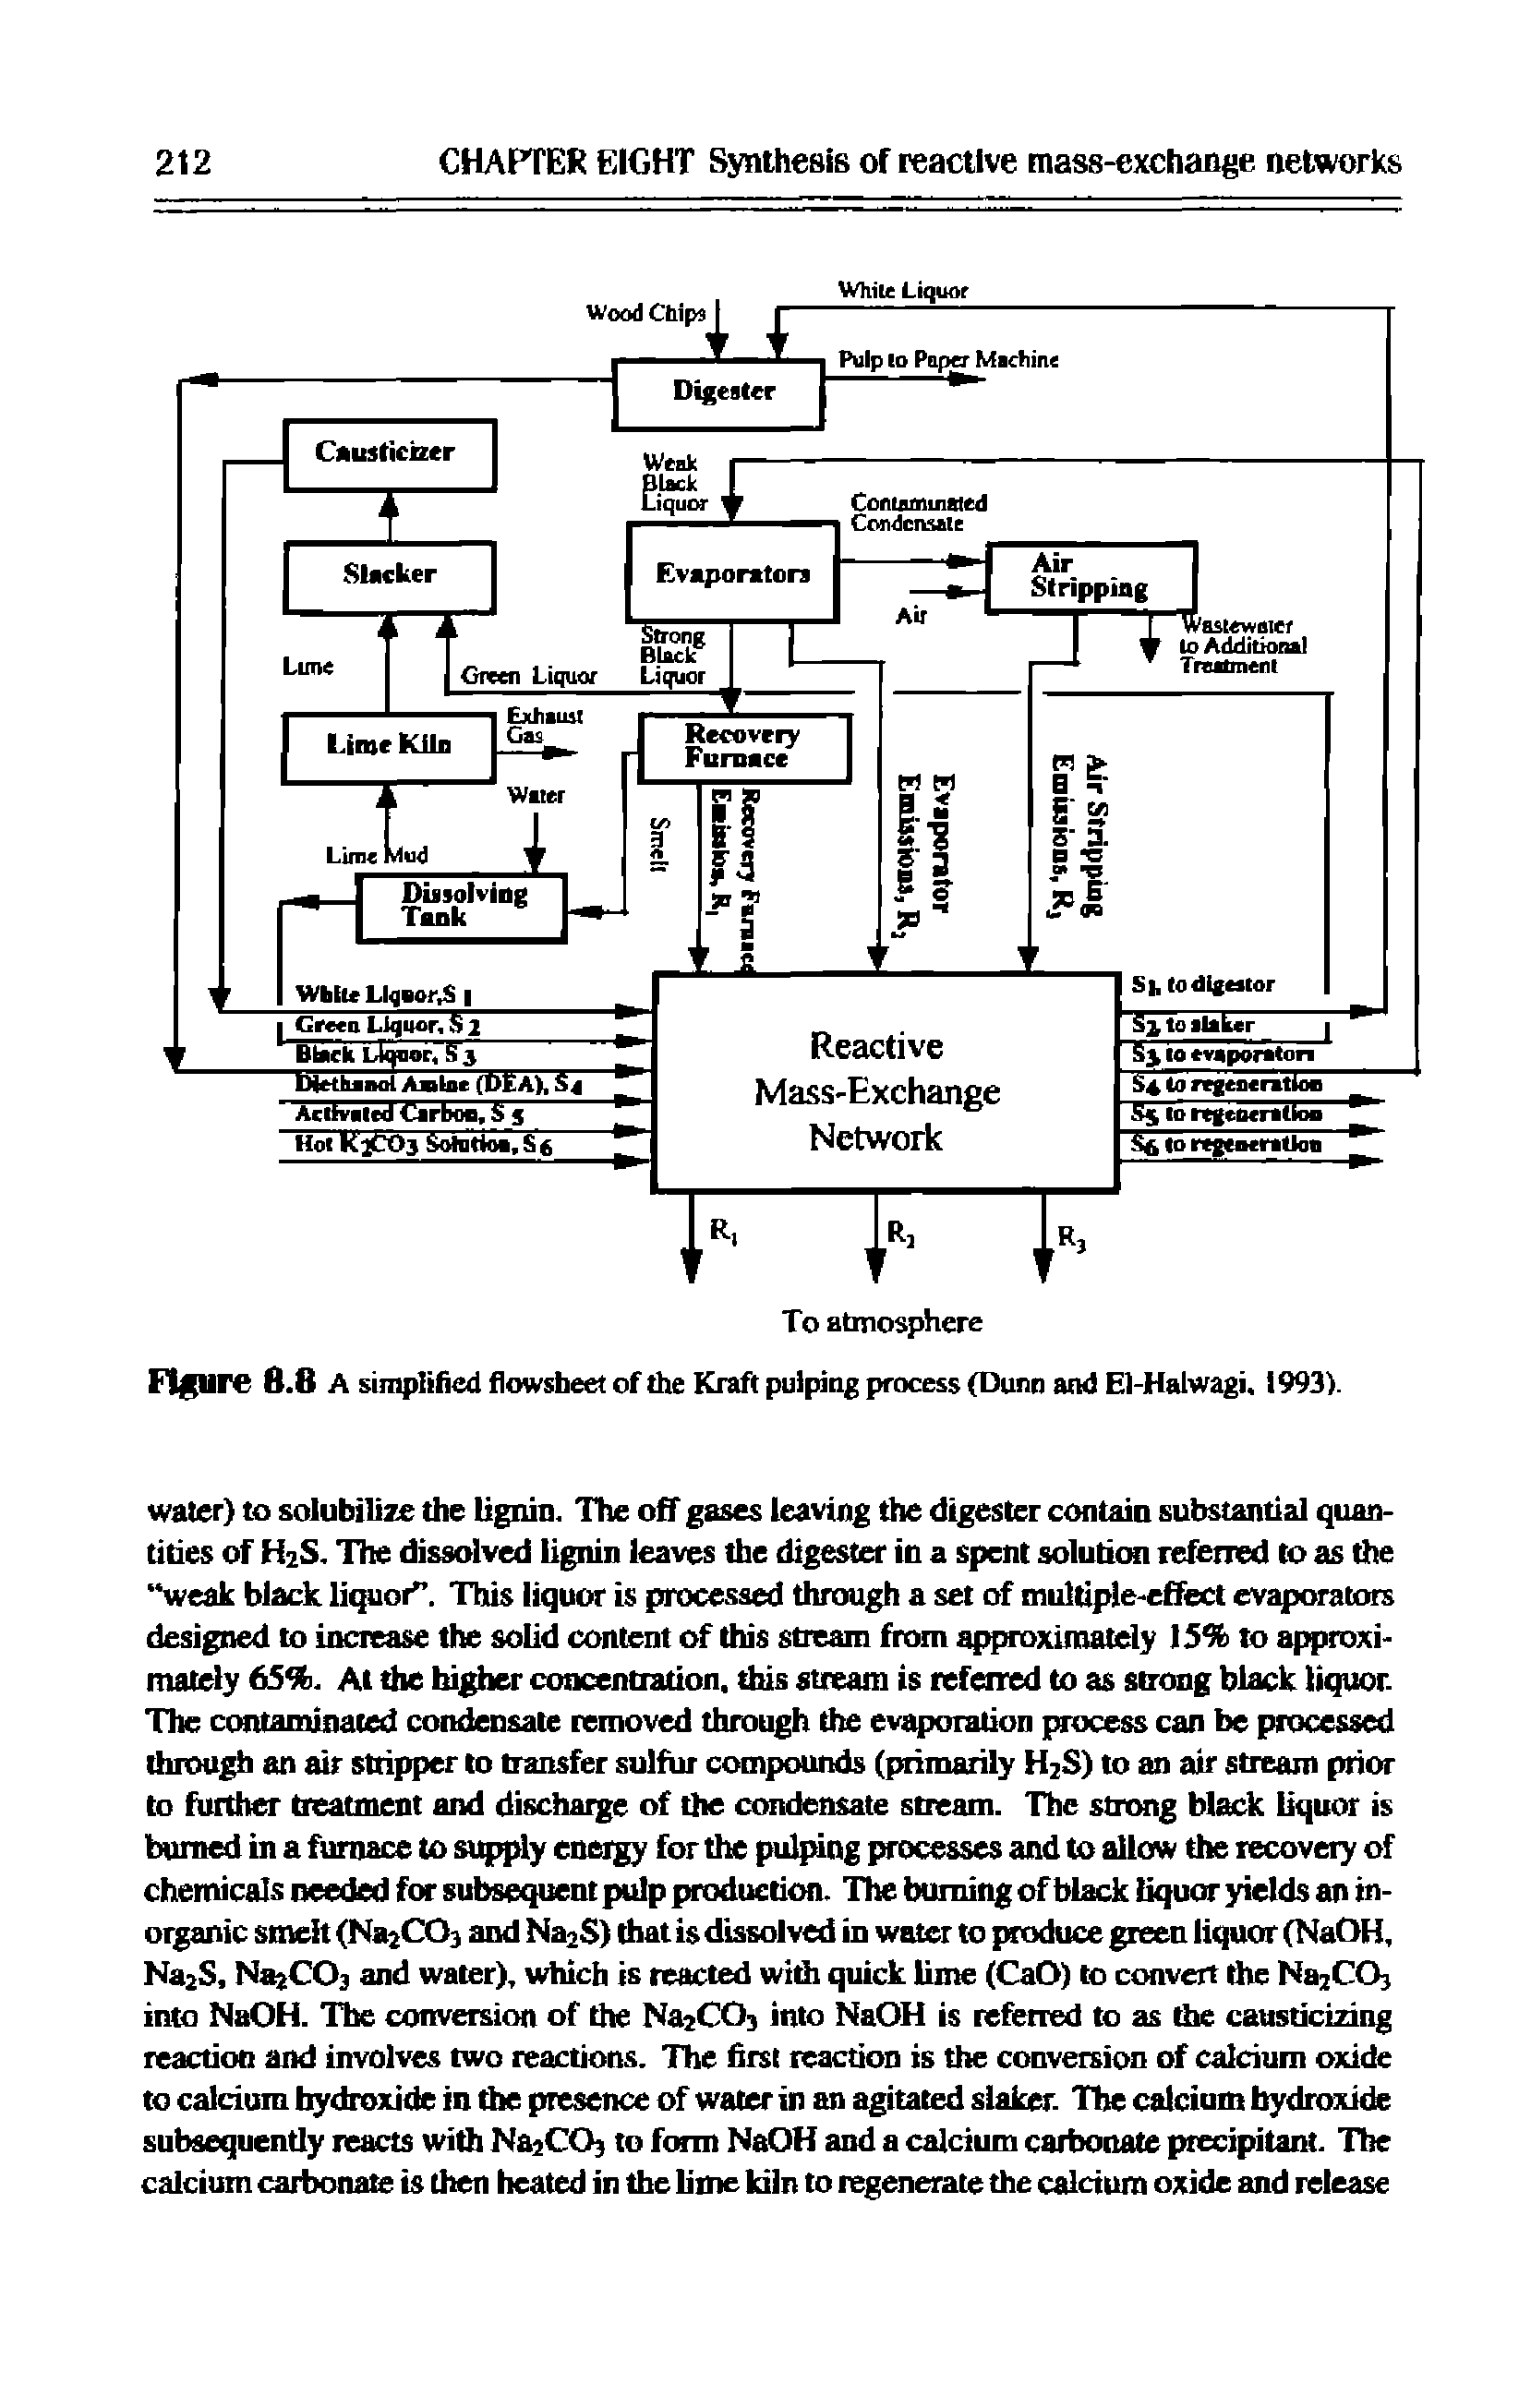 Figure 8.8 A simplified flowsheet of the Kraft pulping process (Dunn and ETHalwagi, 1993).